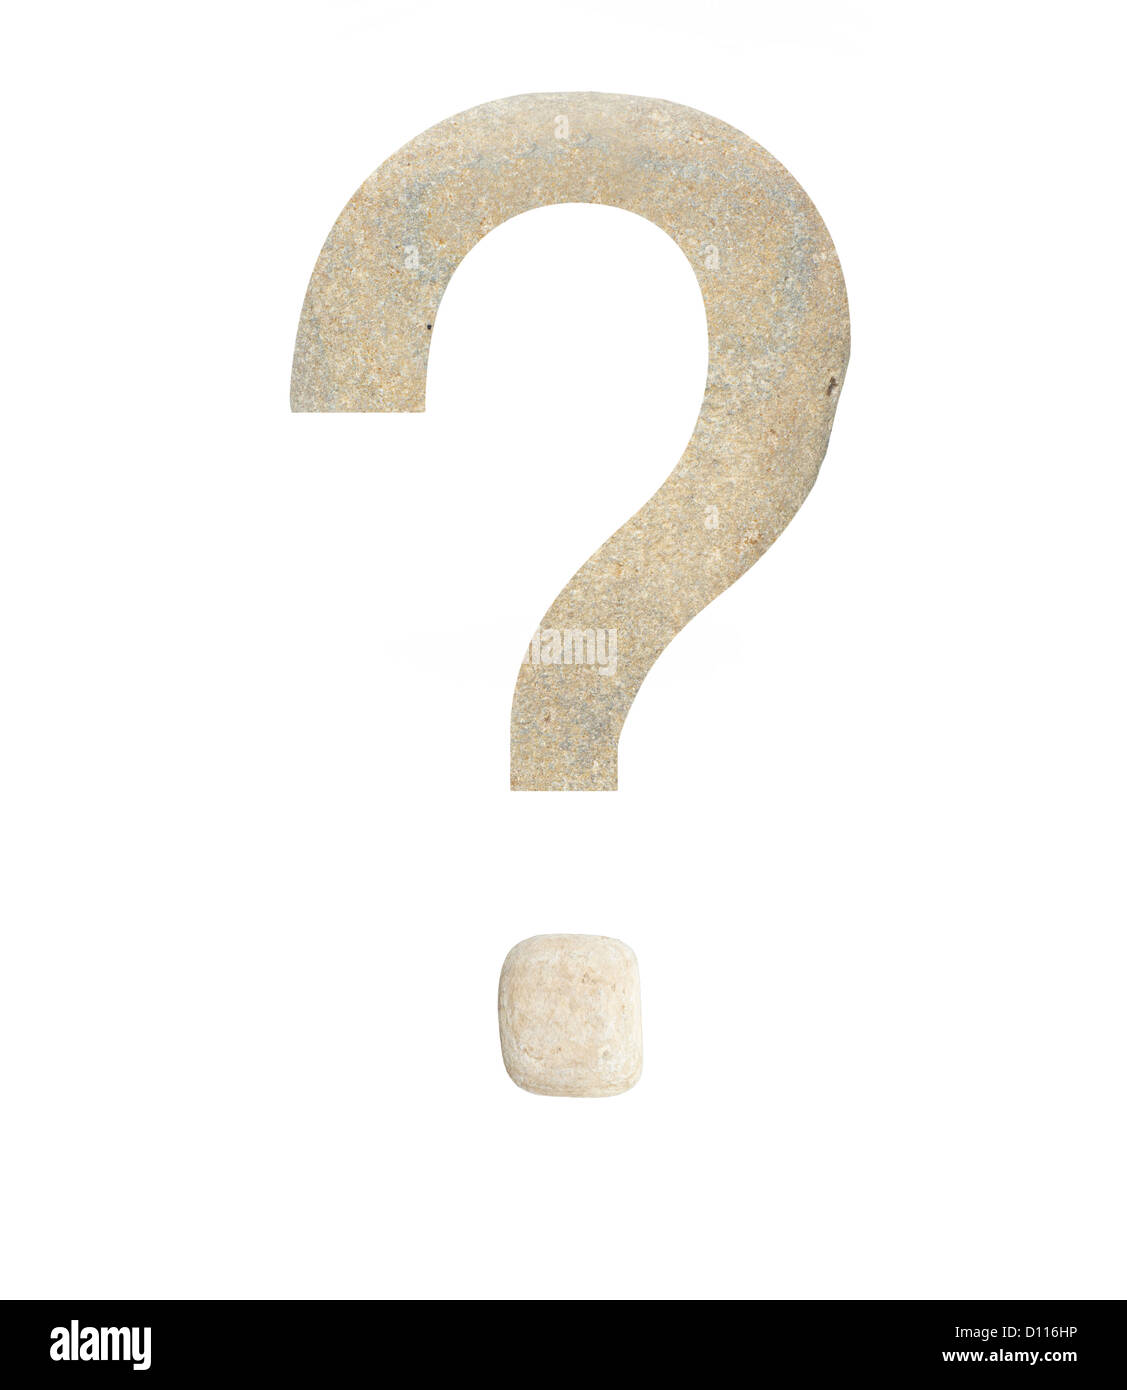 The isolated stone materials question mark. Stock Photo